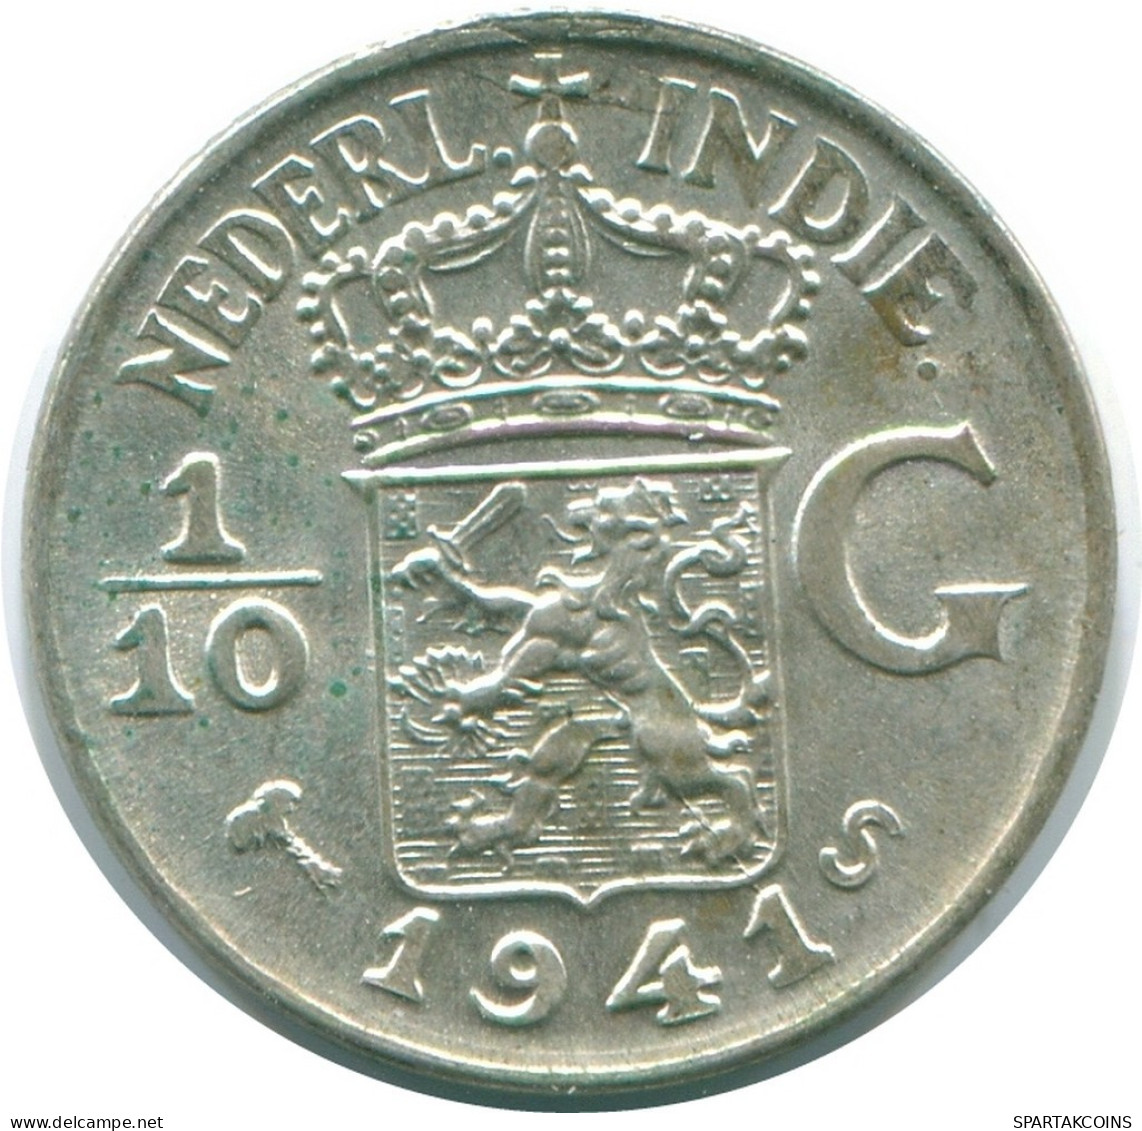 1/10 GULDEN 1941 S NETHERLANDS EAST INDIES SILVER Colonial Coin #NL13694.3.U.A - Indie Olandesi